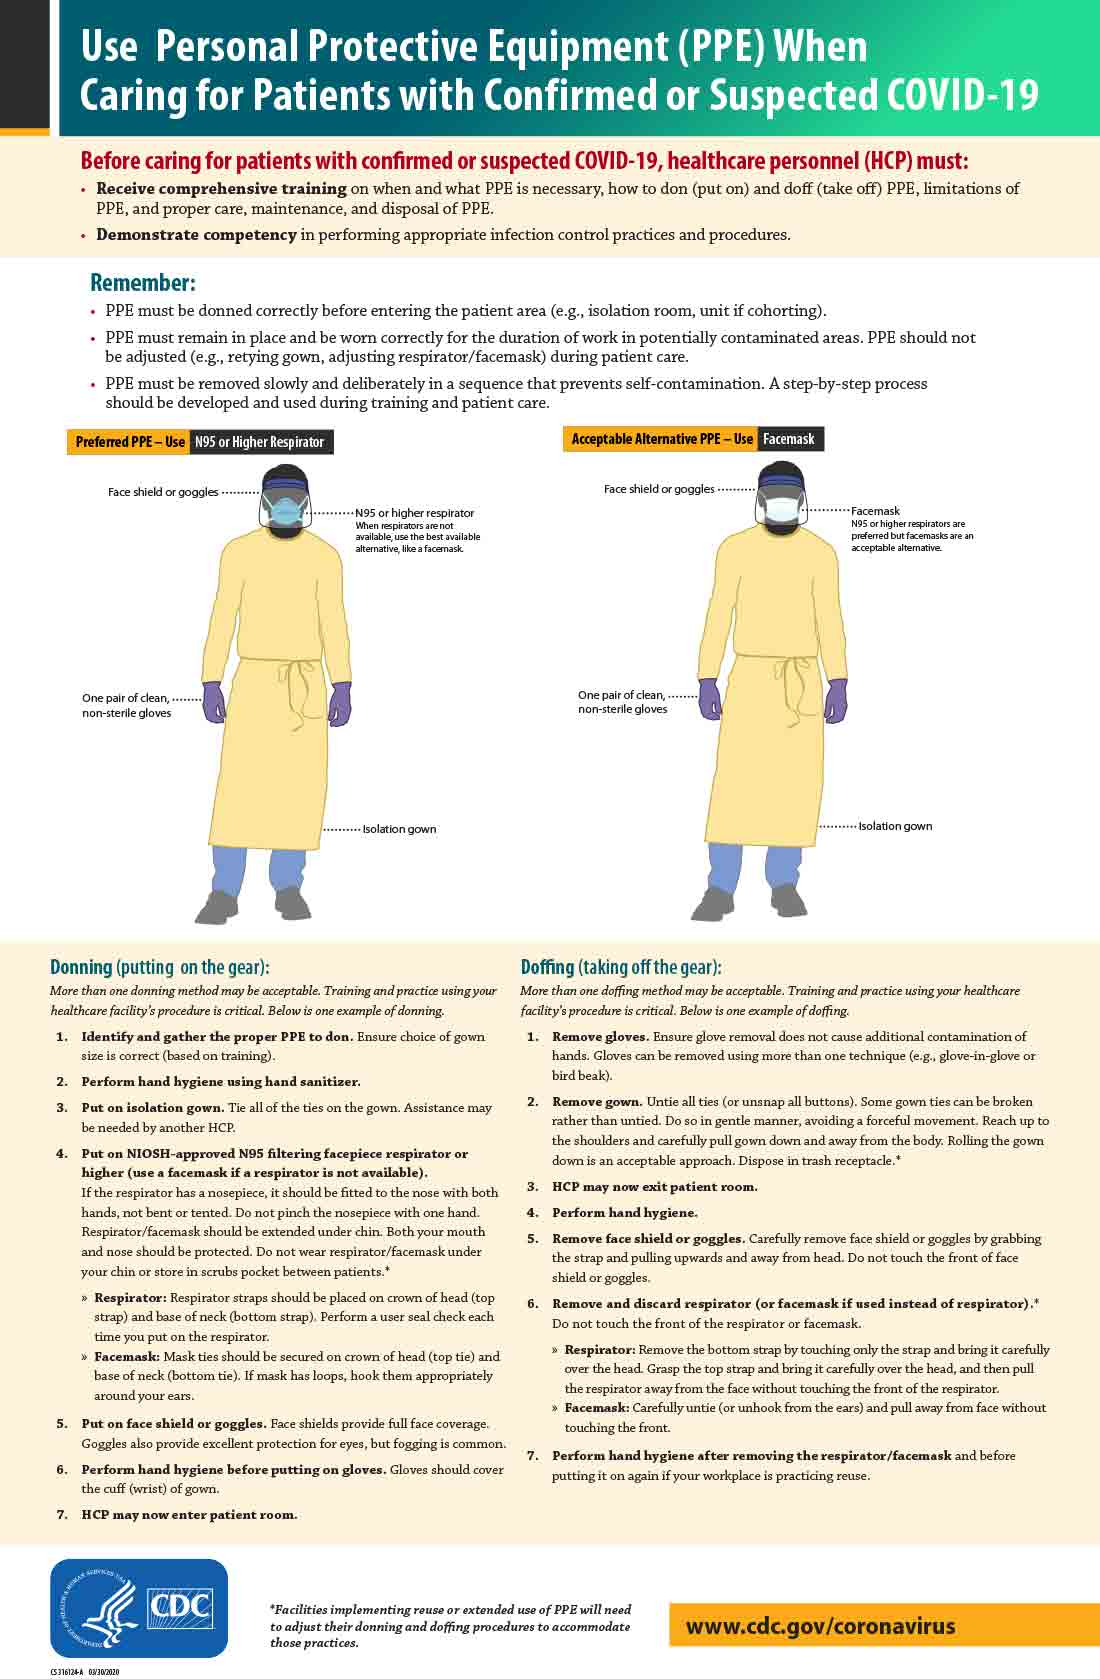 Use (PPE) When Caring for Patients with Confirmed or Suspected COVID-19 (11×17)